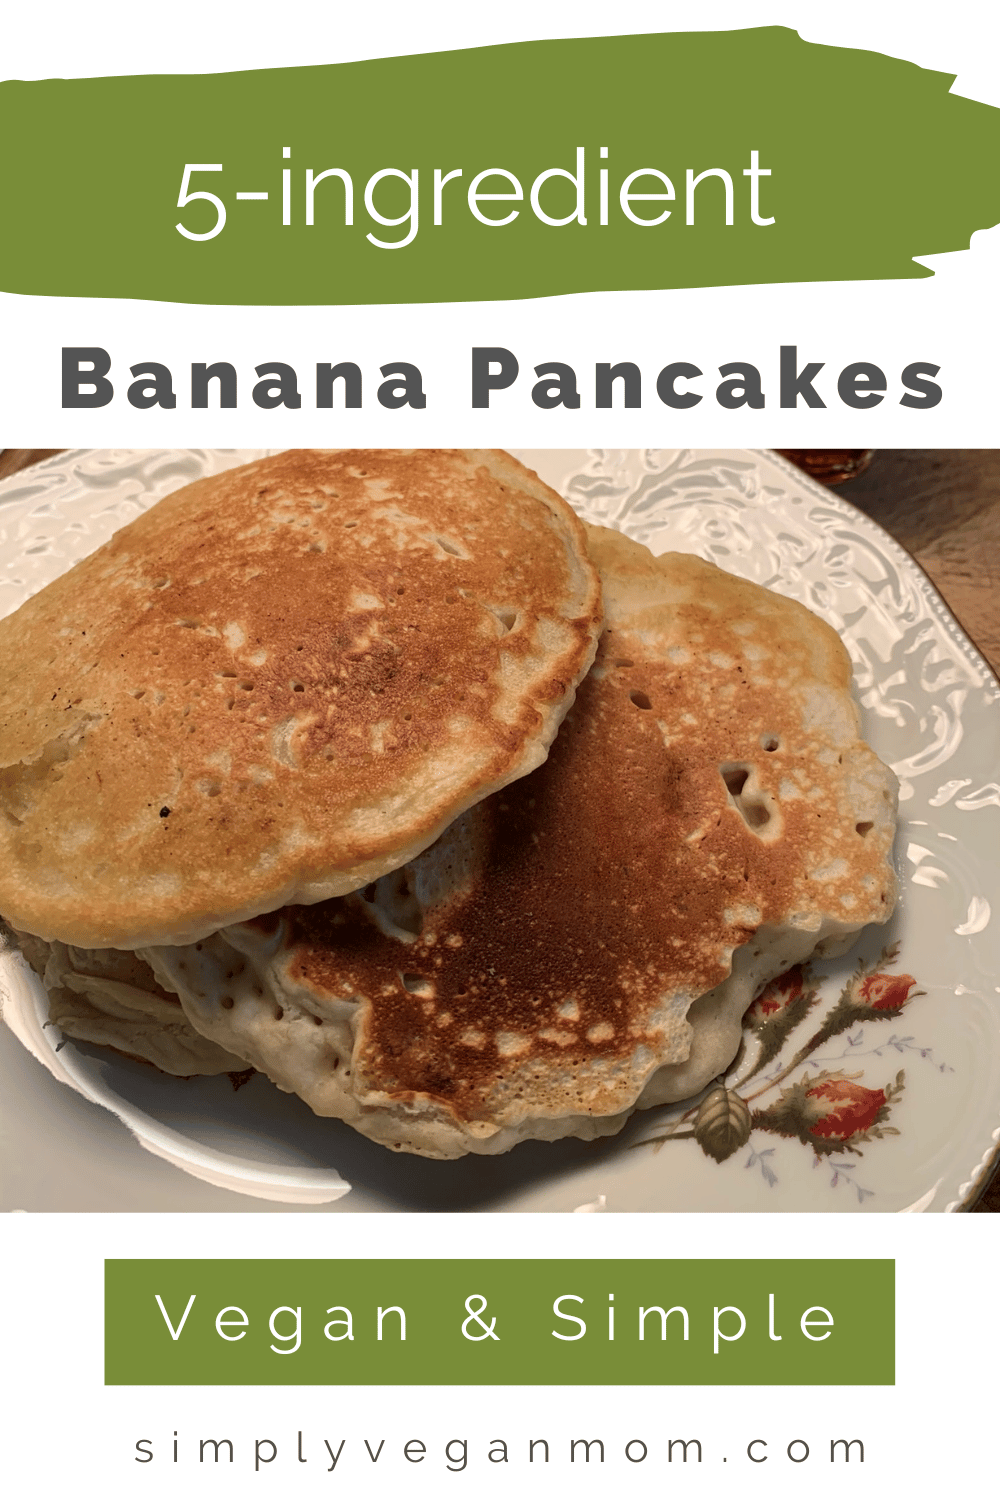 pin with title and image of 5-ingredient banana pancakes on a plate